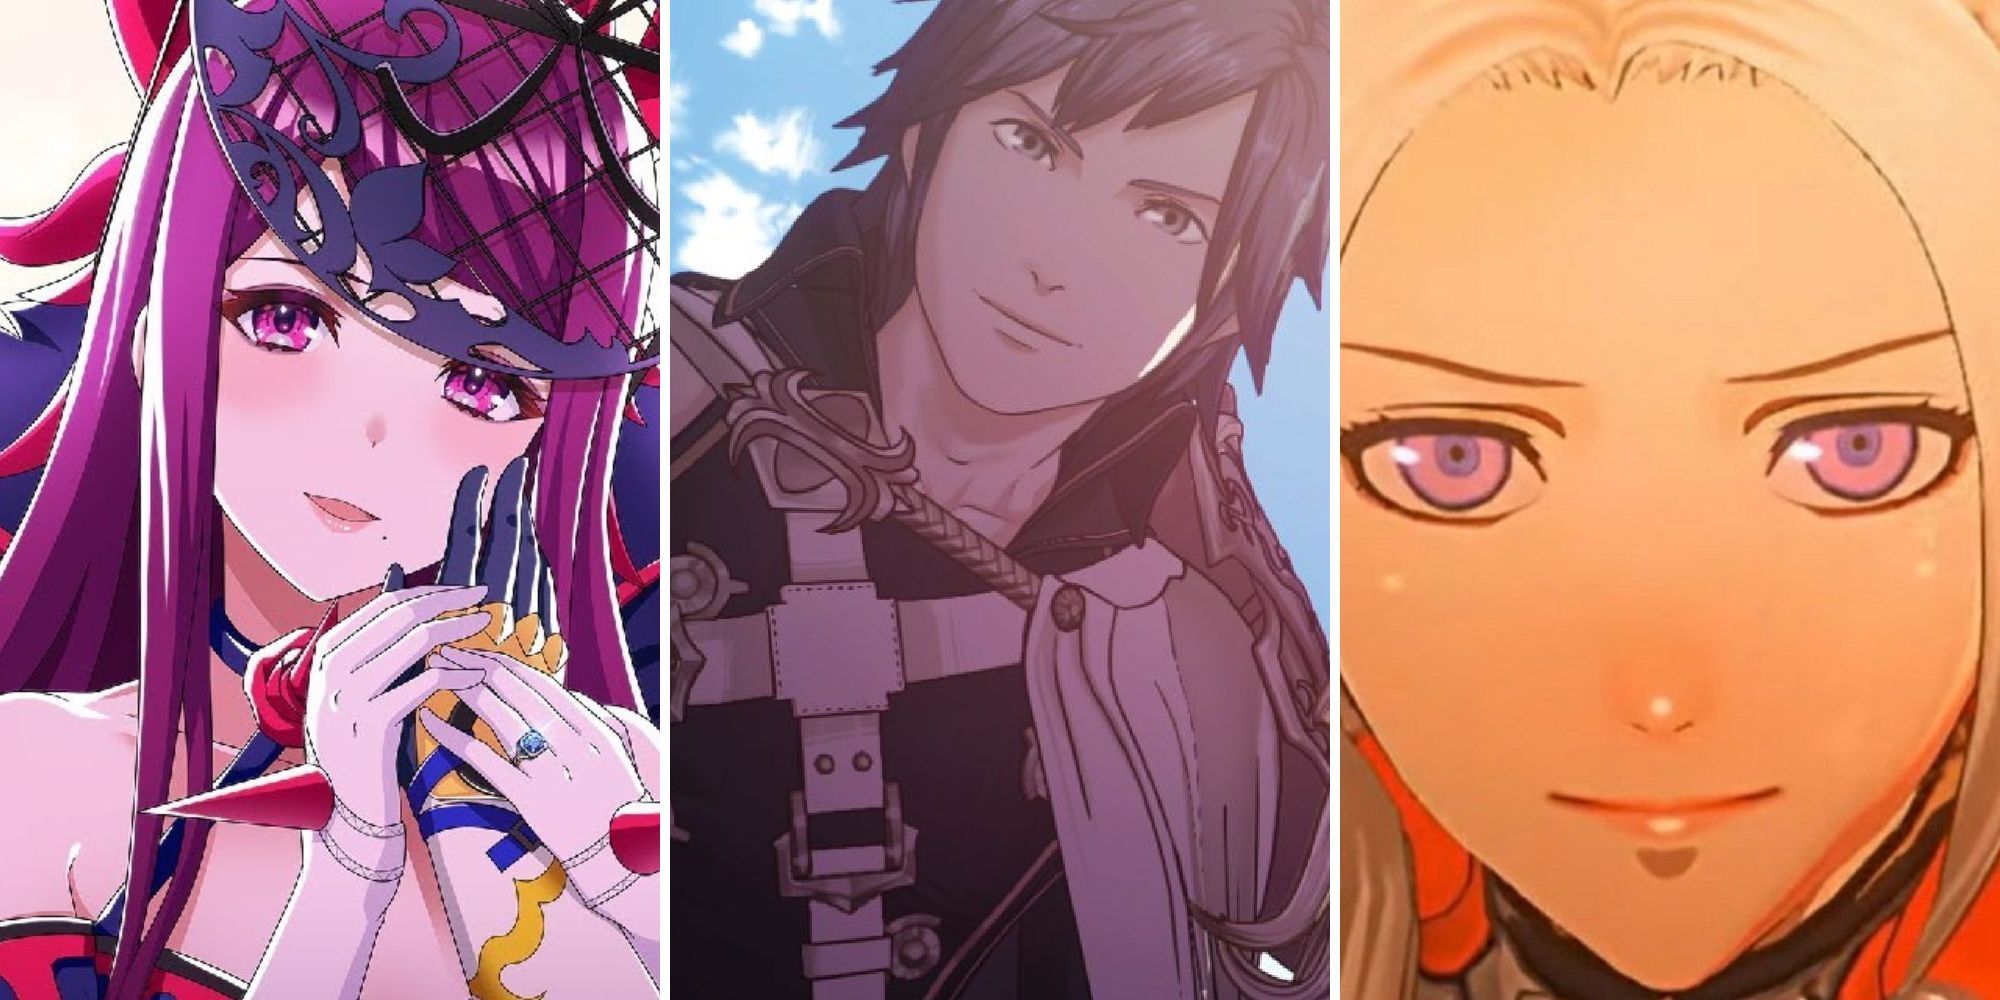 A grid of romances from the games Fire Emblem Engage, Fire Emblem Awakening, and Fire Emblem: Three Houses